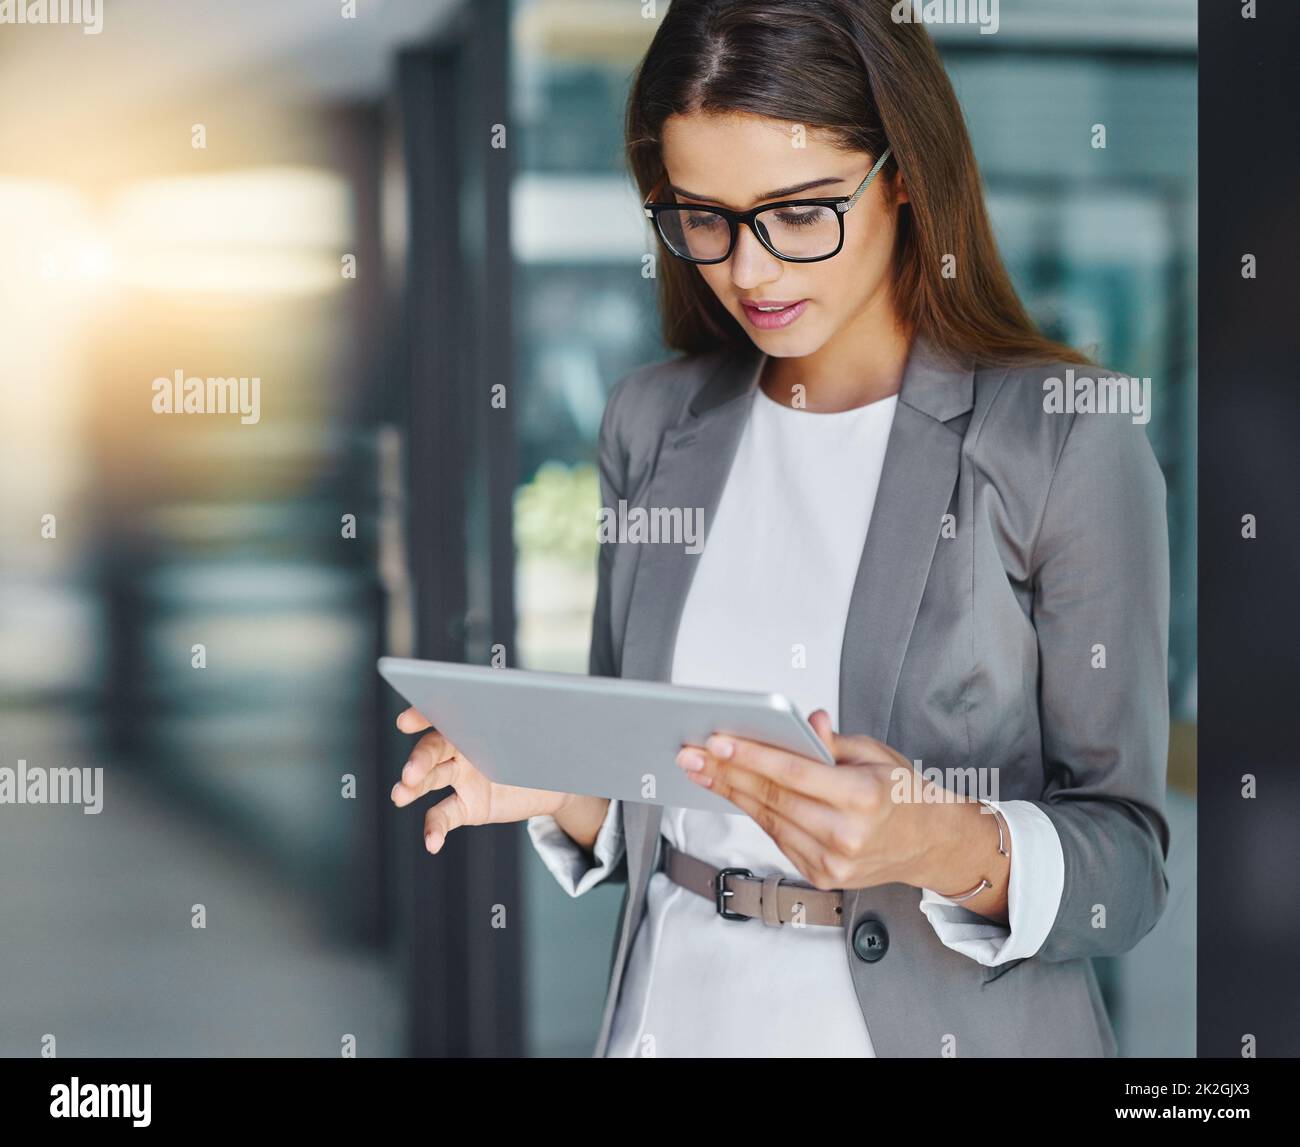 Connected to the word of corporate business. Cropped shot of an attractive young businesswoman using her tablet in the office. Stock Photo